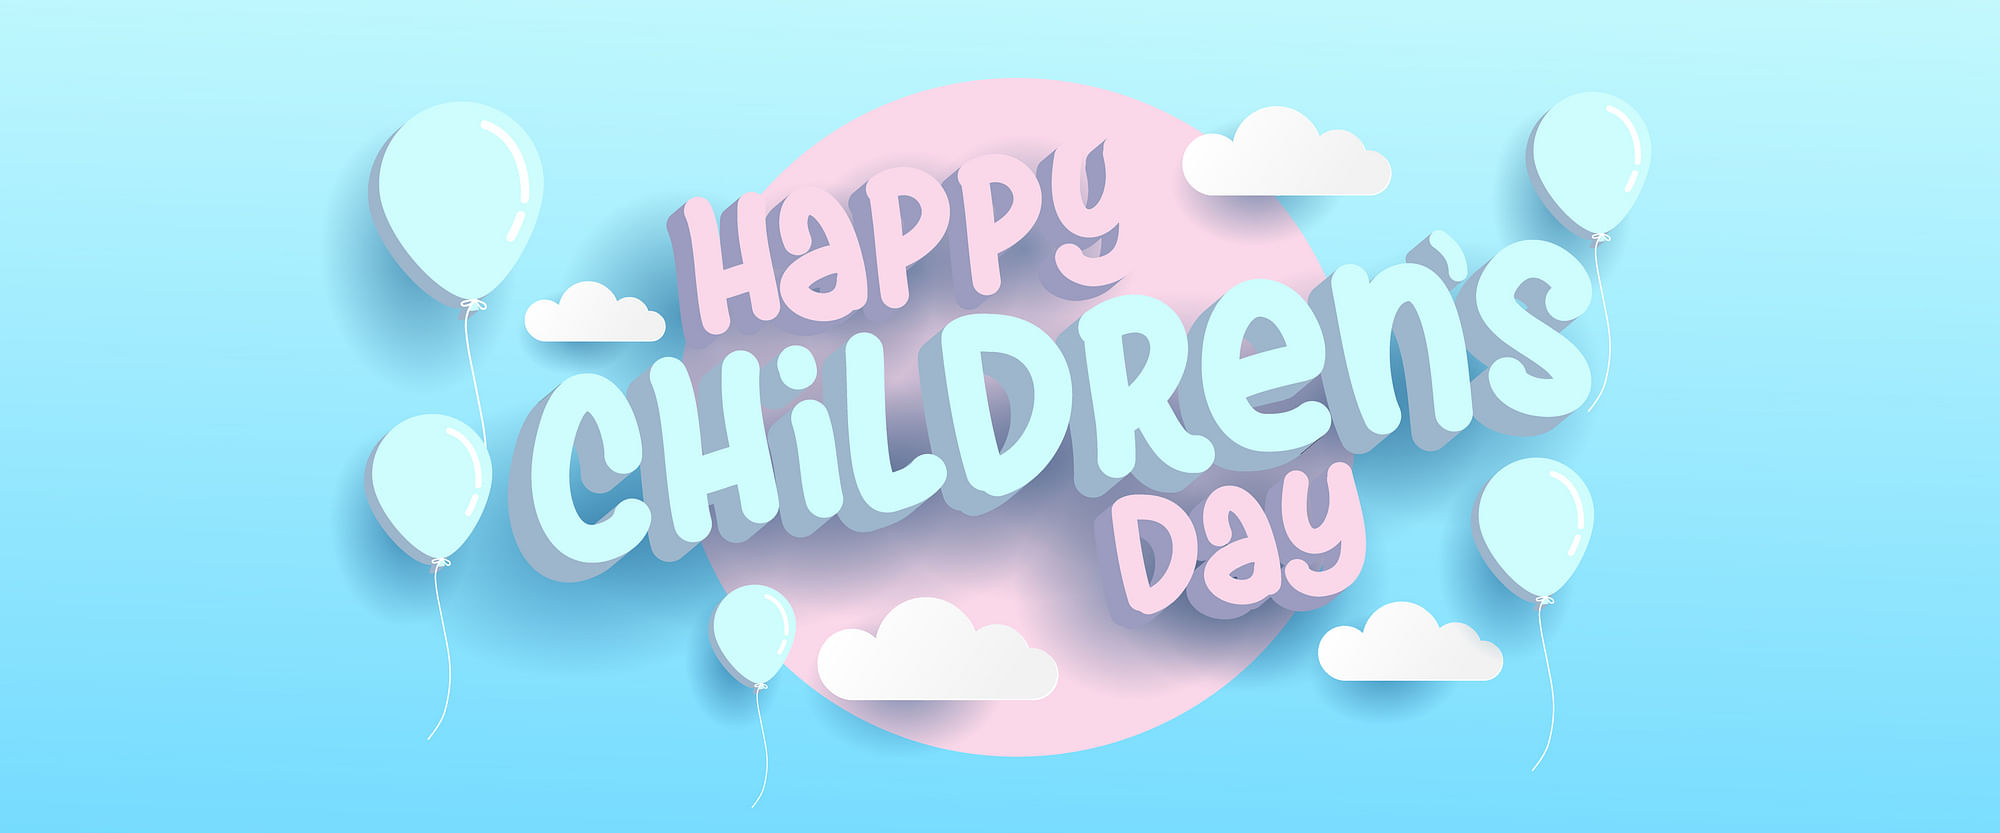 Children’s Day 2020 Wishes, Images, Quotes, Cards and Greetings In English &amp; Hindi